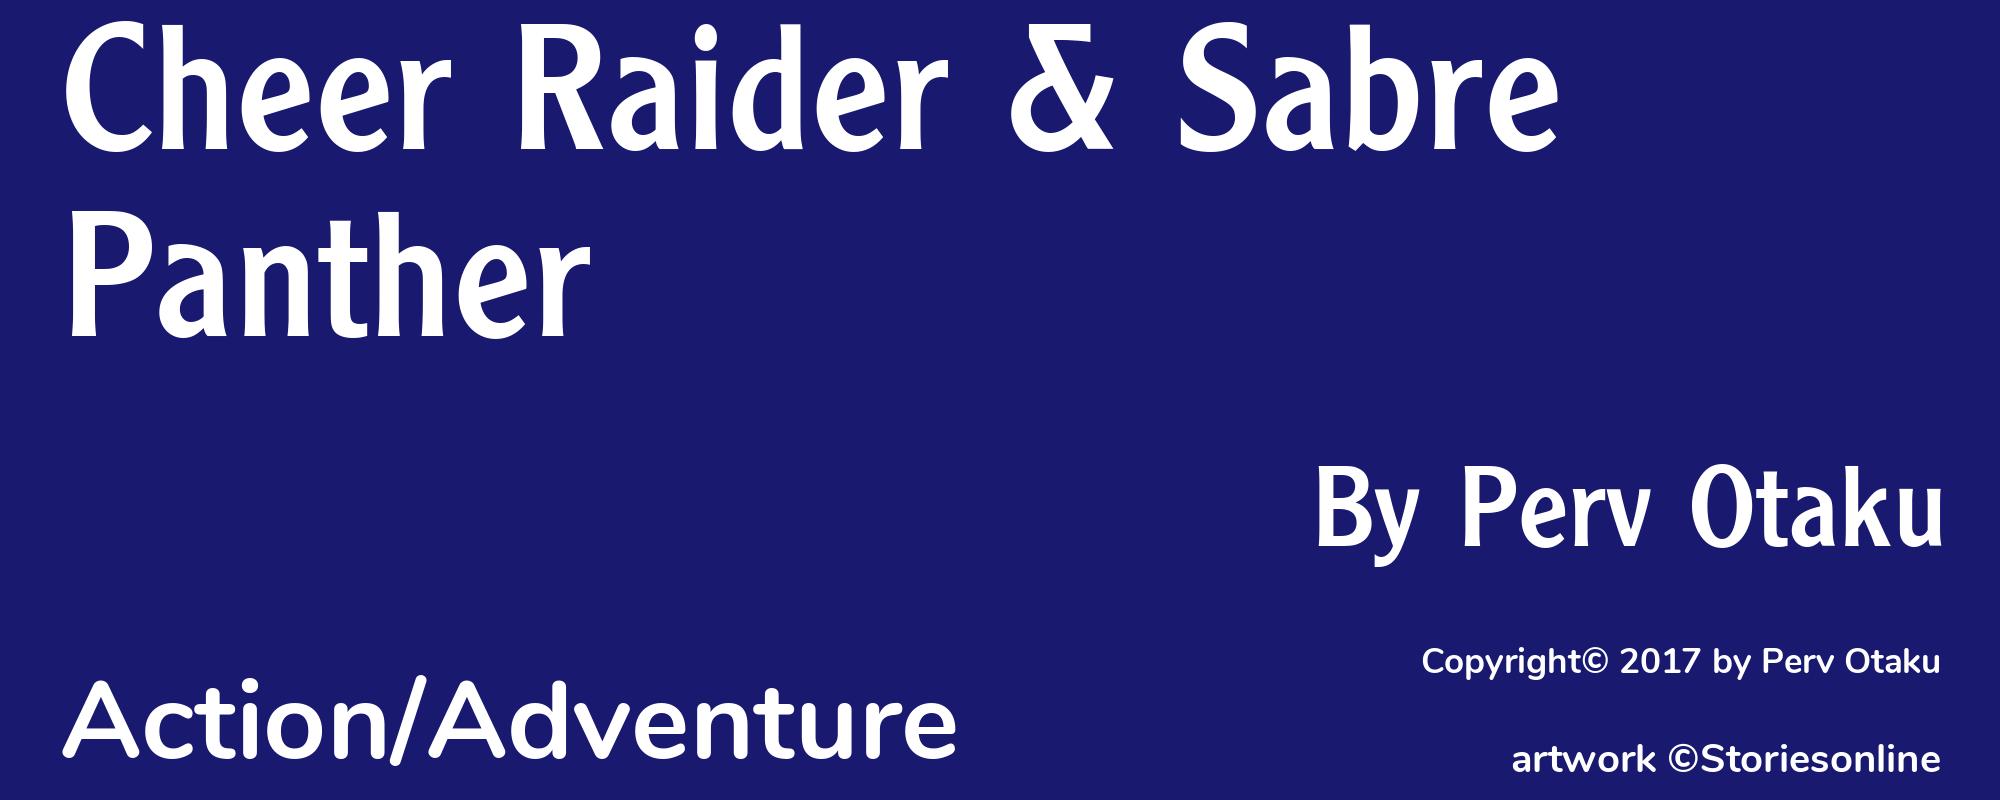 Cheer Raider & Sabre Panther - Cover